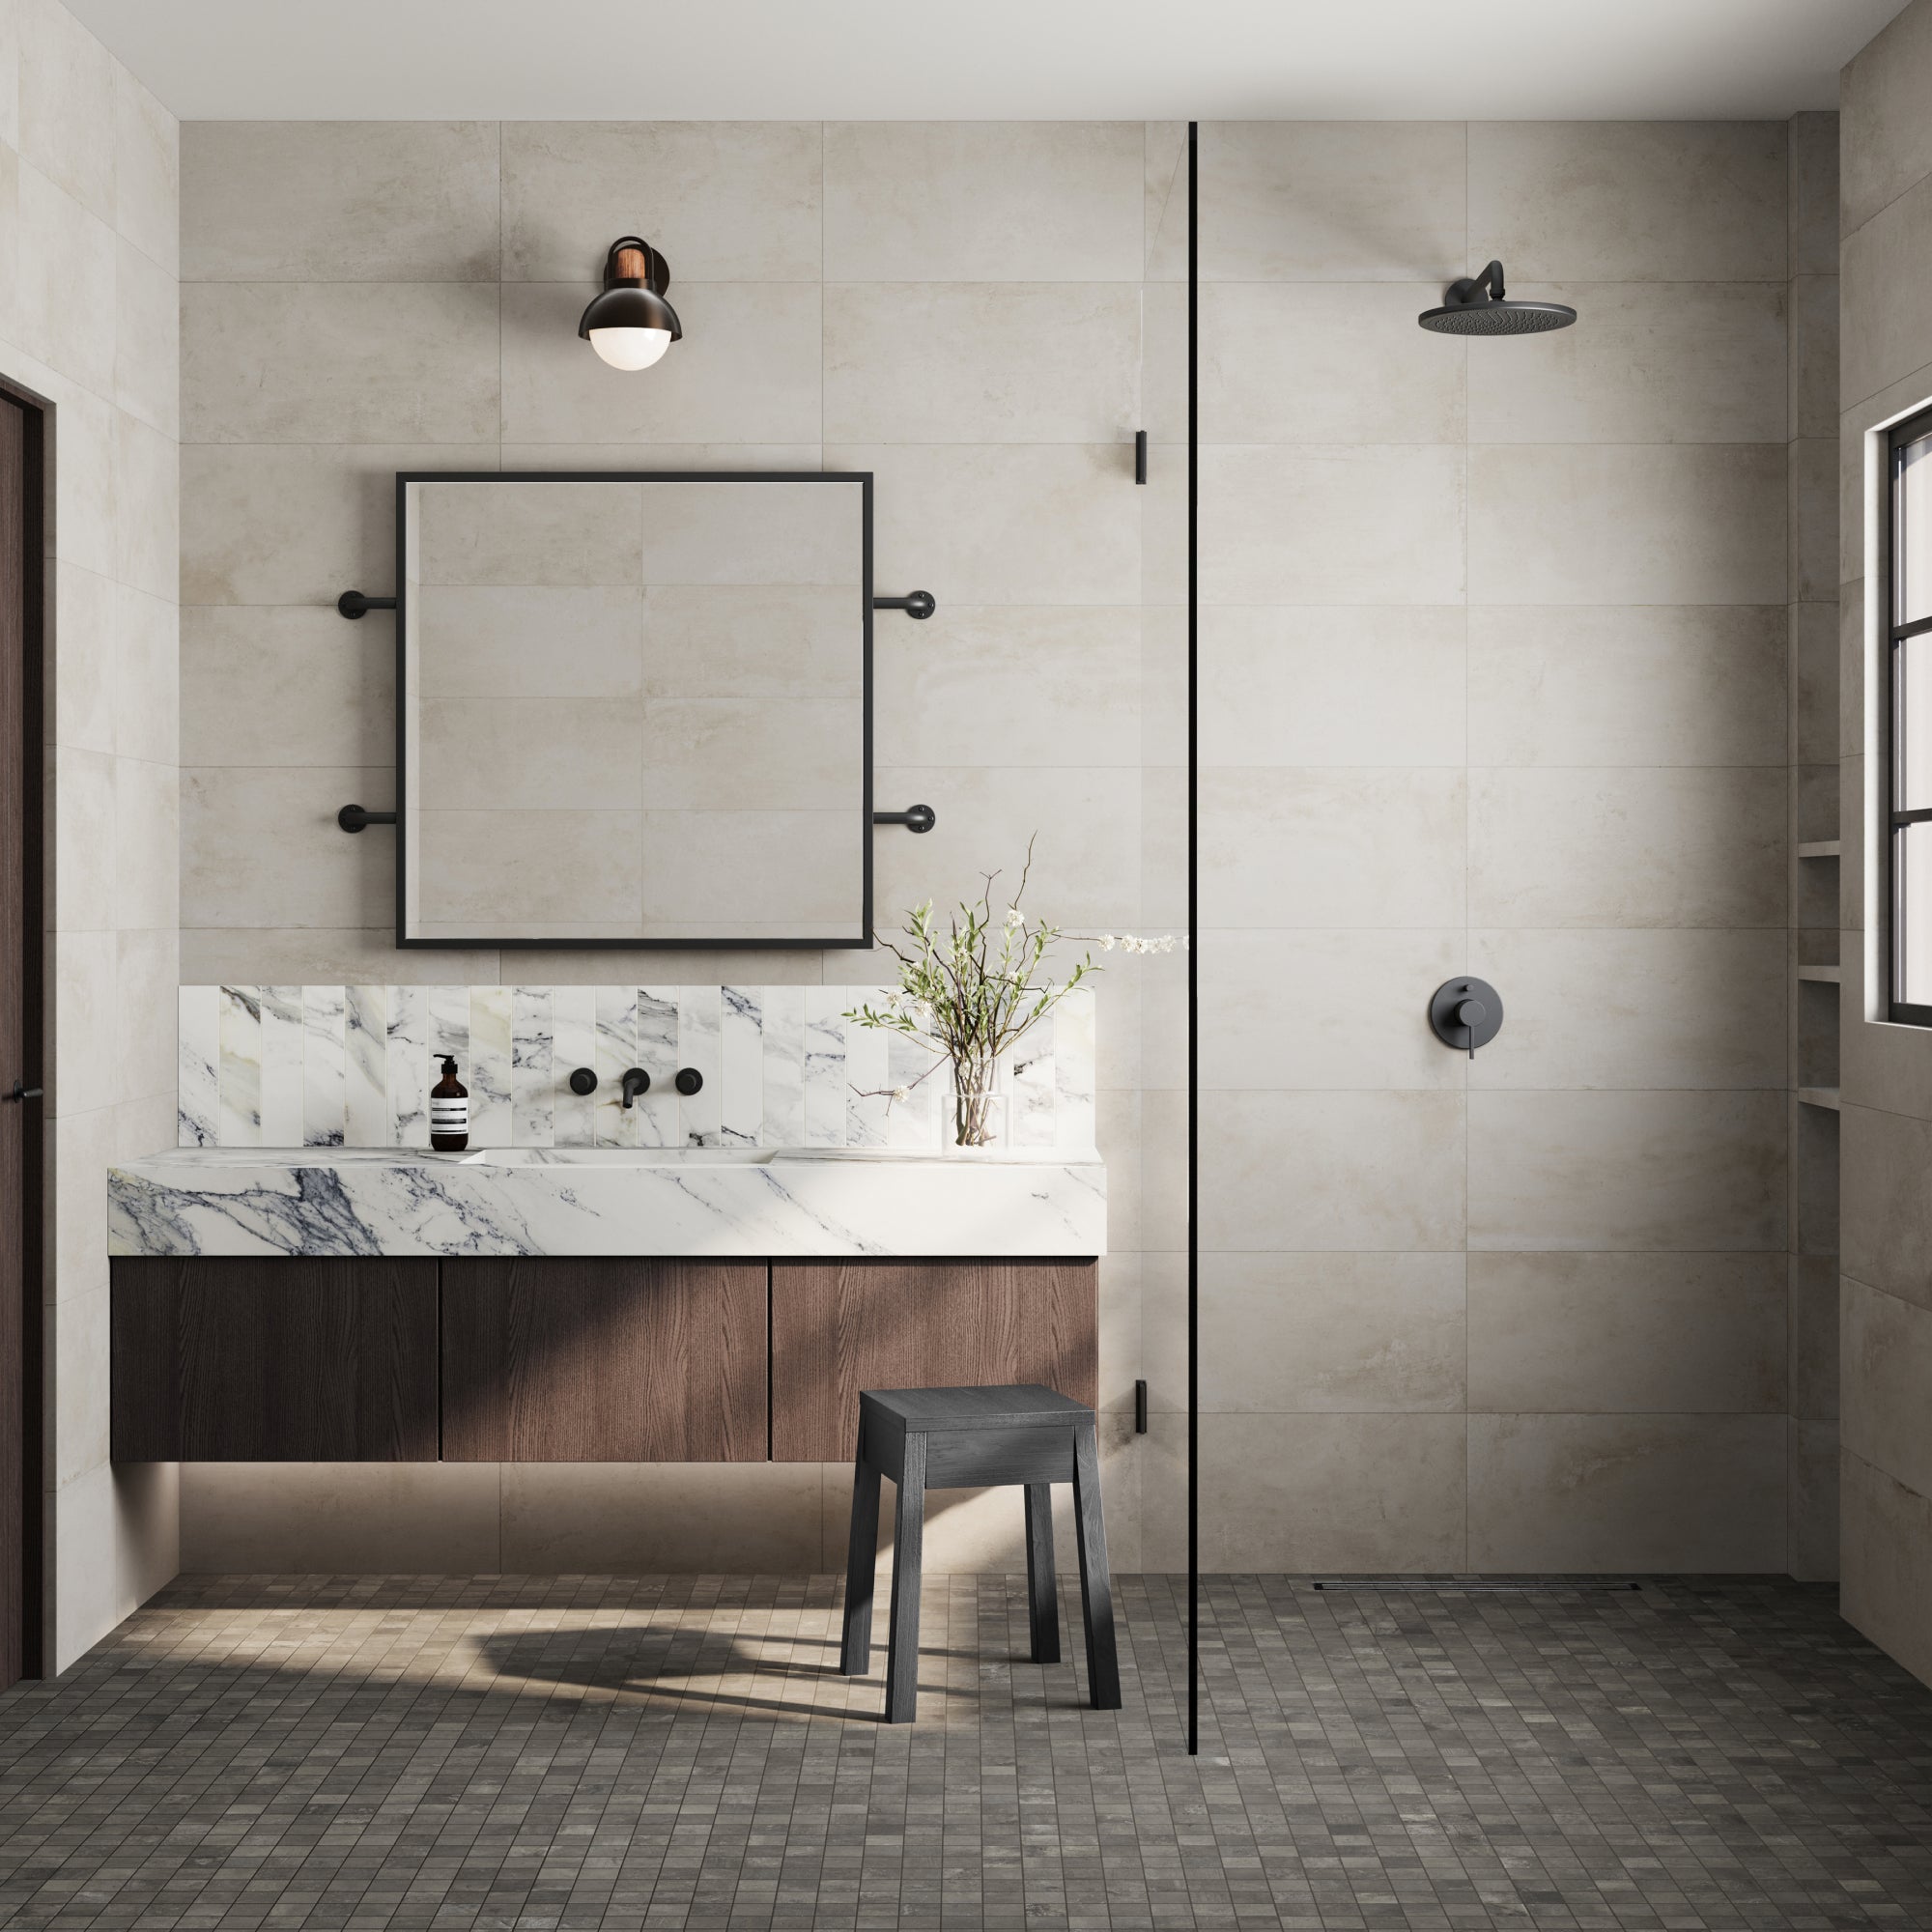 A modern bathroom exemplifies luxury with a skillful fusion of styles. The floor is adorned with 'cement look' Ramsey 2x2 Matte Porcelain Mosaic Tile in Smoke, offering a contemporary, industrial touch. Walls, elegantly draped in Ramsey 12x24 Matte Porcelain Tile in Chalk, harmonize with the vanity, accentuated by the 'marble-look' Aniston 3x12 Polished Porcelain Tile in Calacatta Antico. A symphony of textures and tones, crafting a space where comfort meets sophistication.